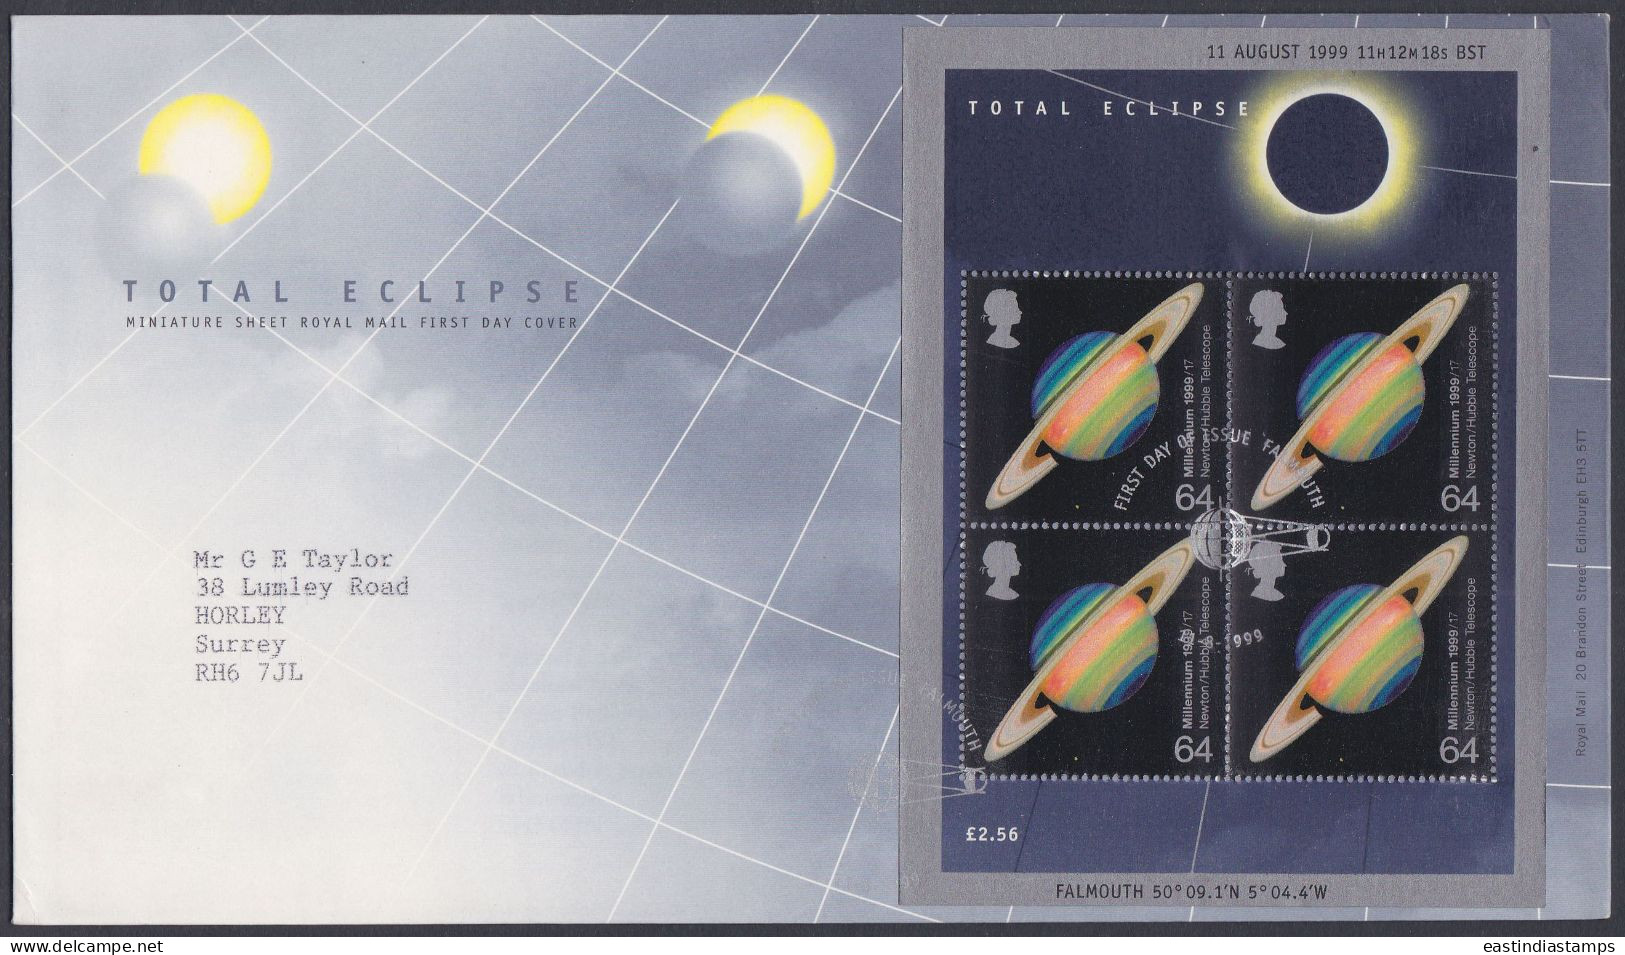 GB Great Britain 1999 FDC Total Eclipse, Saturn, Planet, Sun, Moon, Hubble Telescope Pictorial Postmark, First Day Cover - Covers & Documents